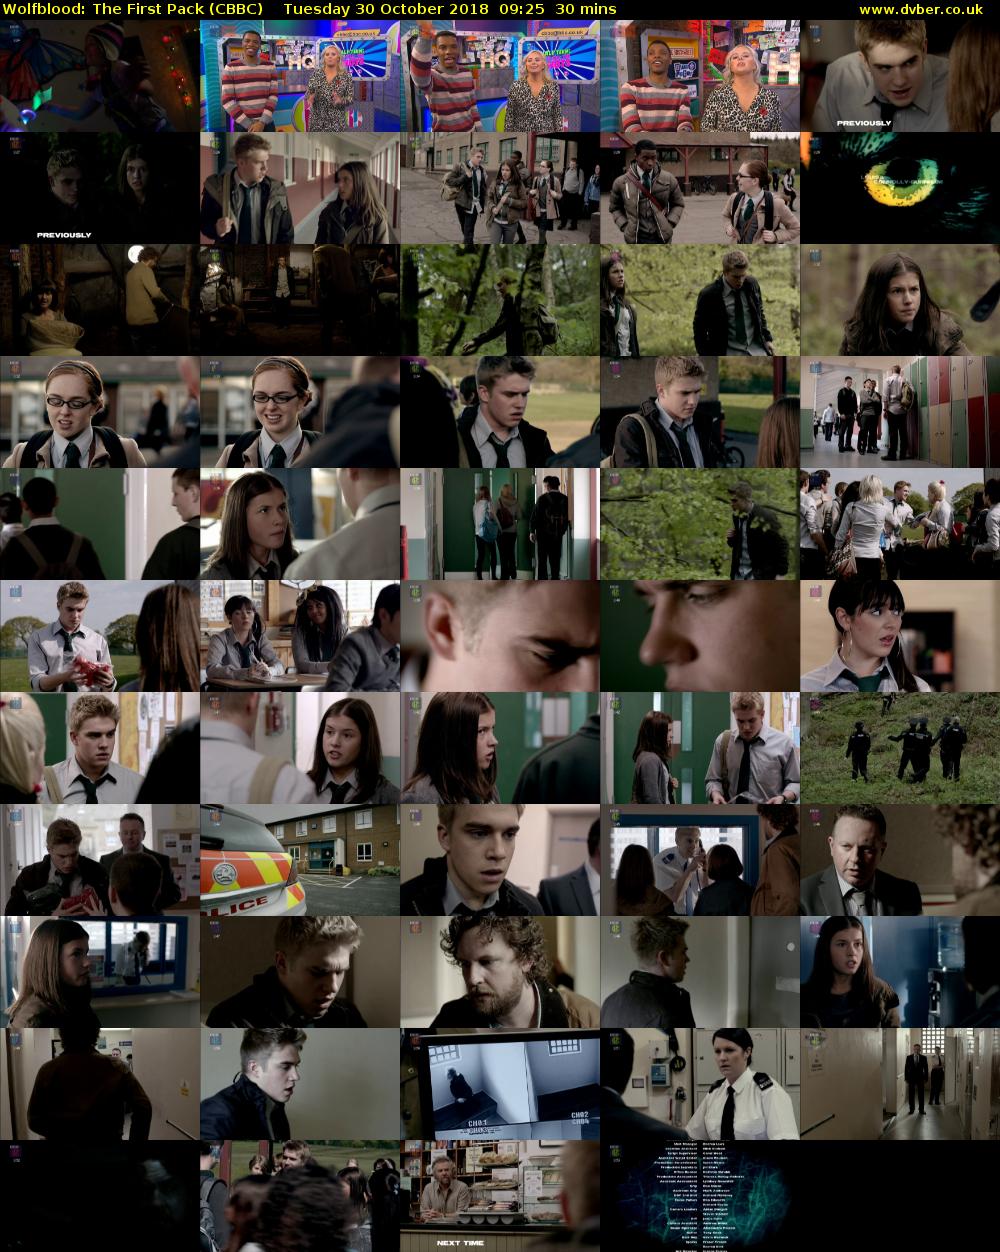 Wolfblood: The First Pack (CBBC) Tuesday 30 October 2018 09:25 - 09:55